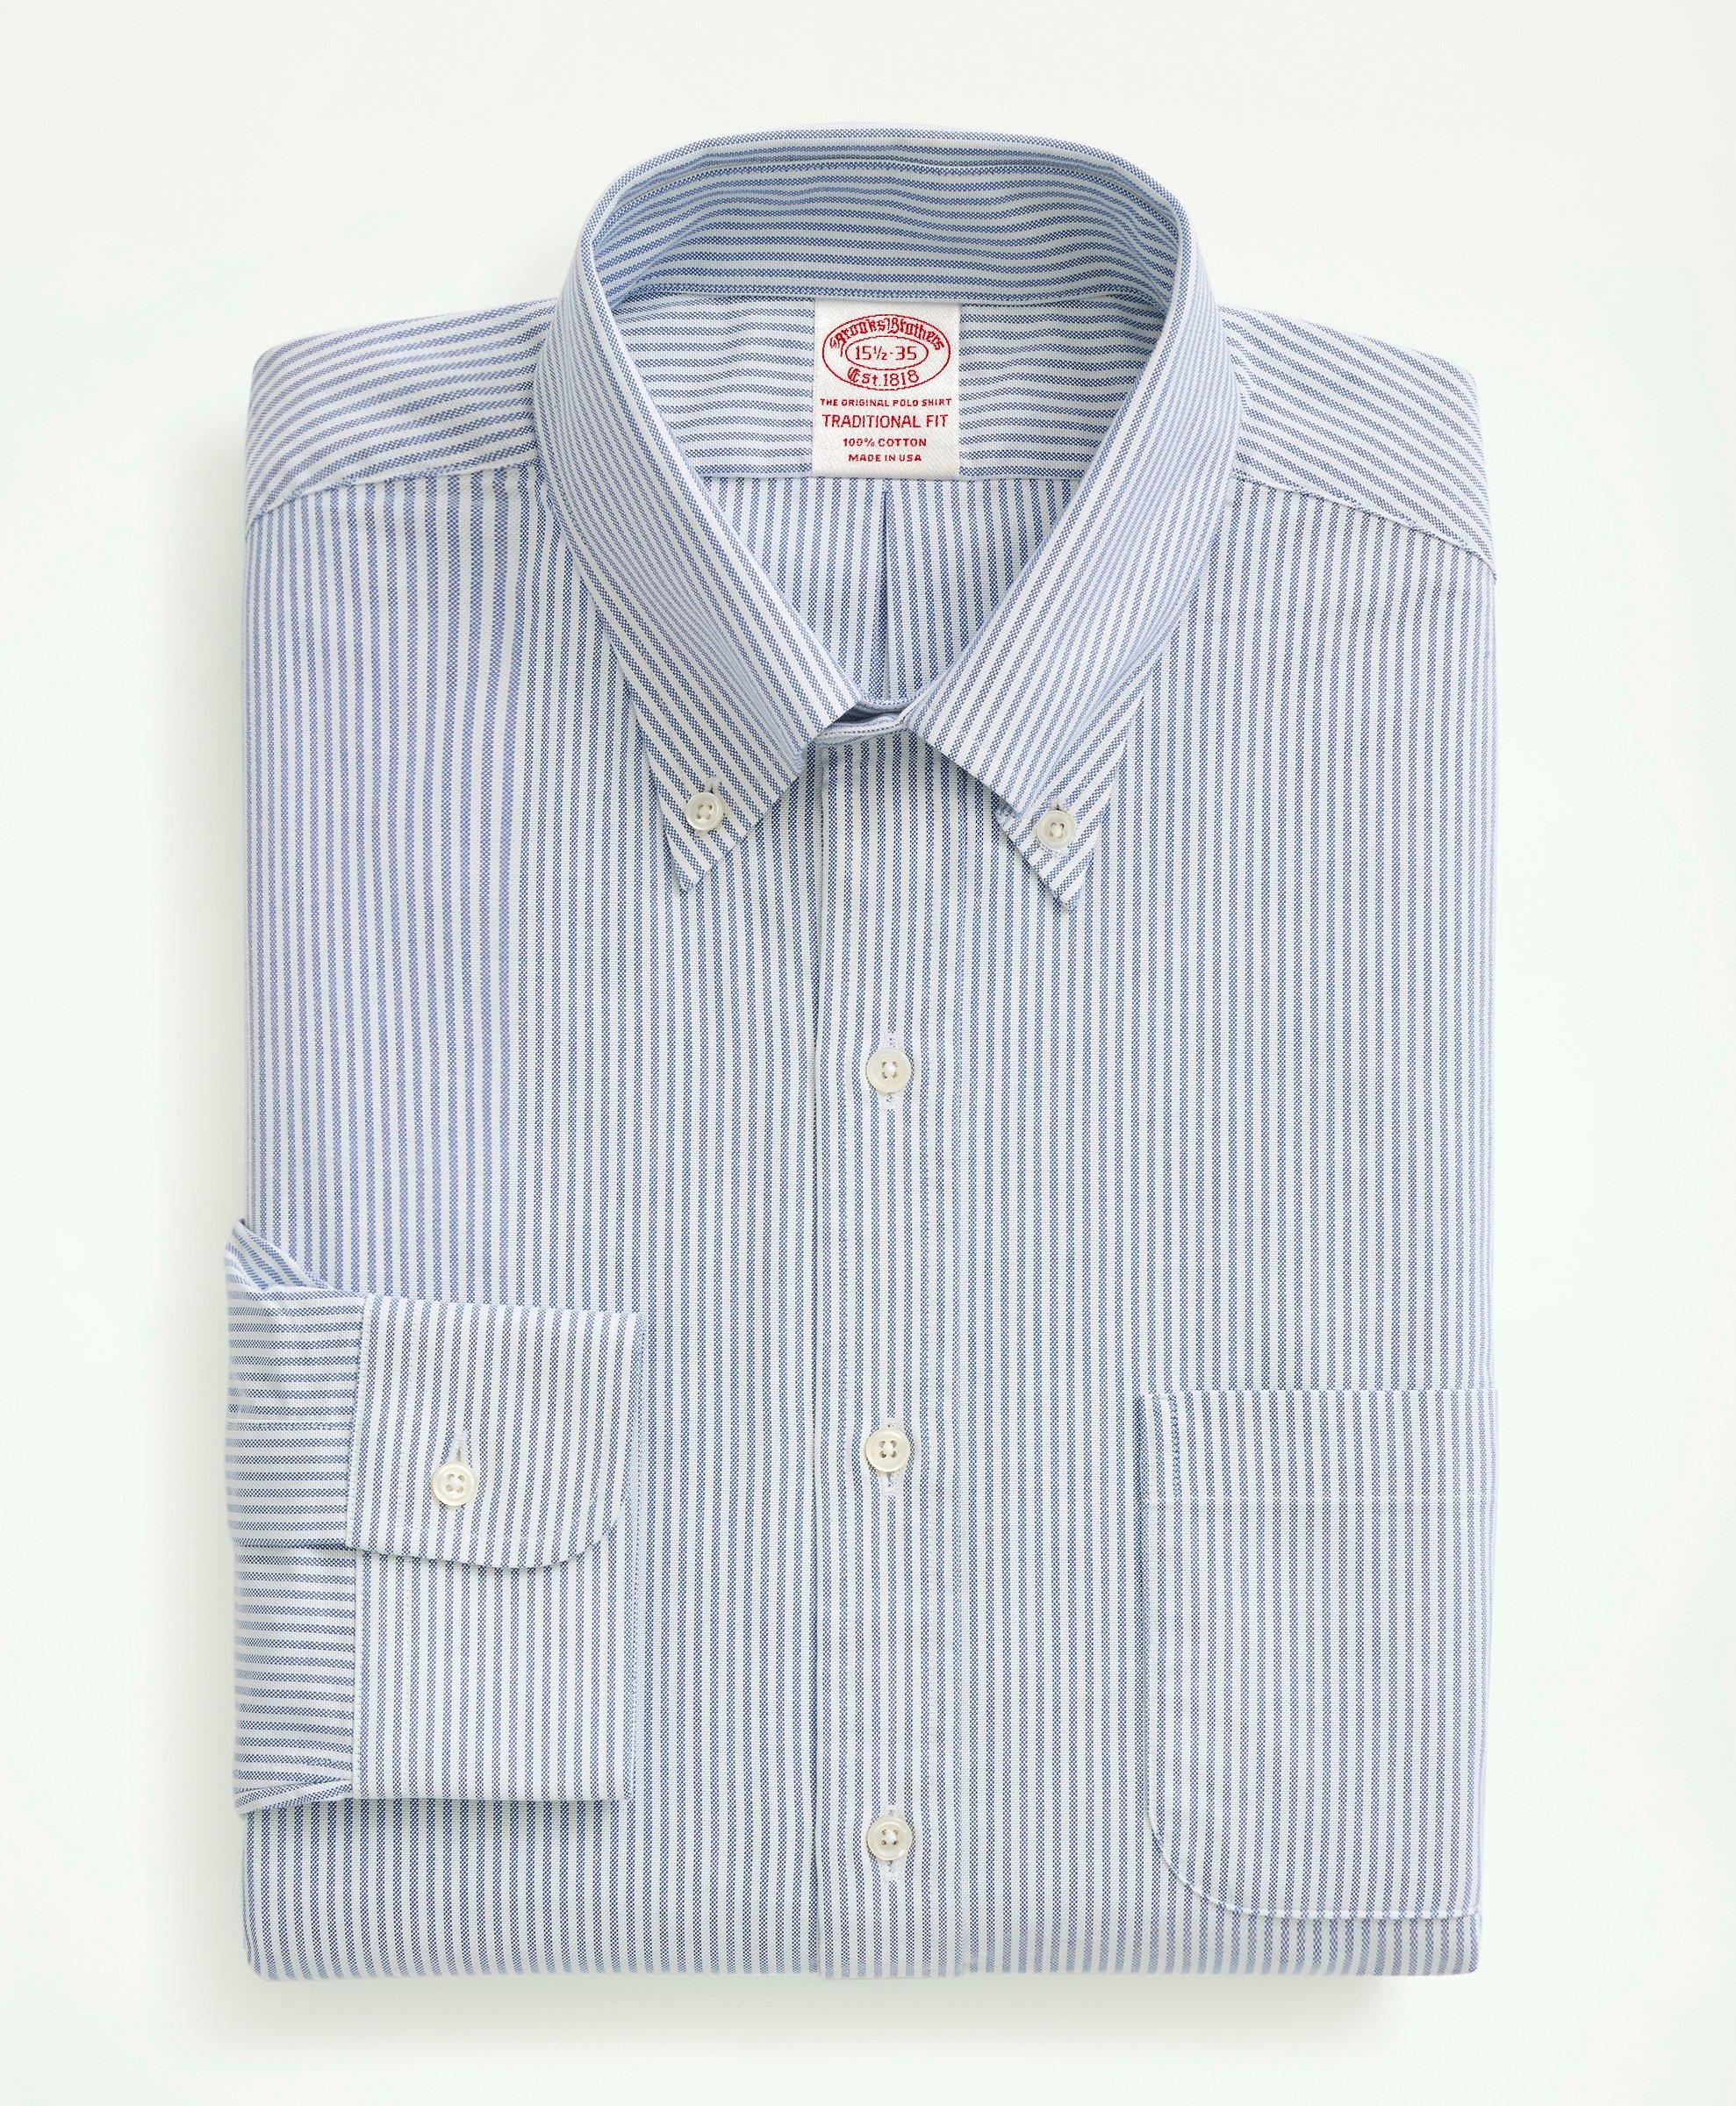 Tailored Athlete Athletic Fit Dress Shirt, Striped Light Blue, XL